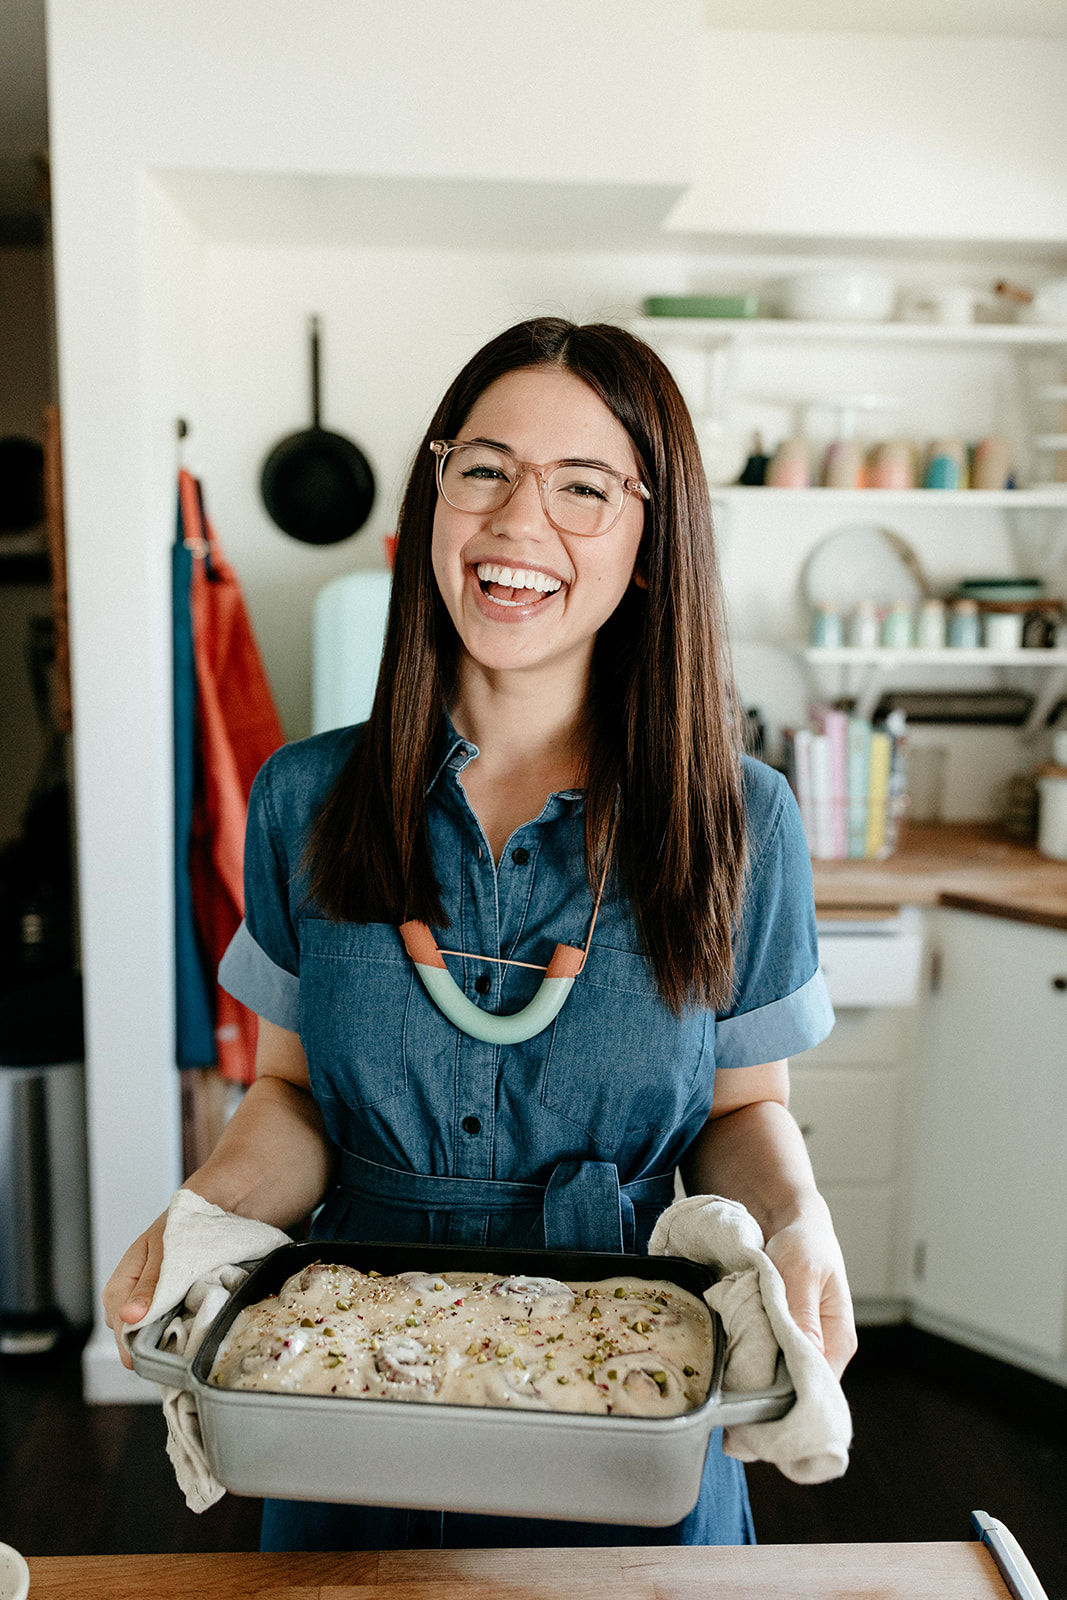 A smiling person wearing a blue dress, brightly colored necklace, glasses, and oven mits, holds a baking tin filled with a white subtance.